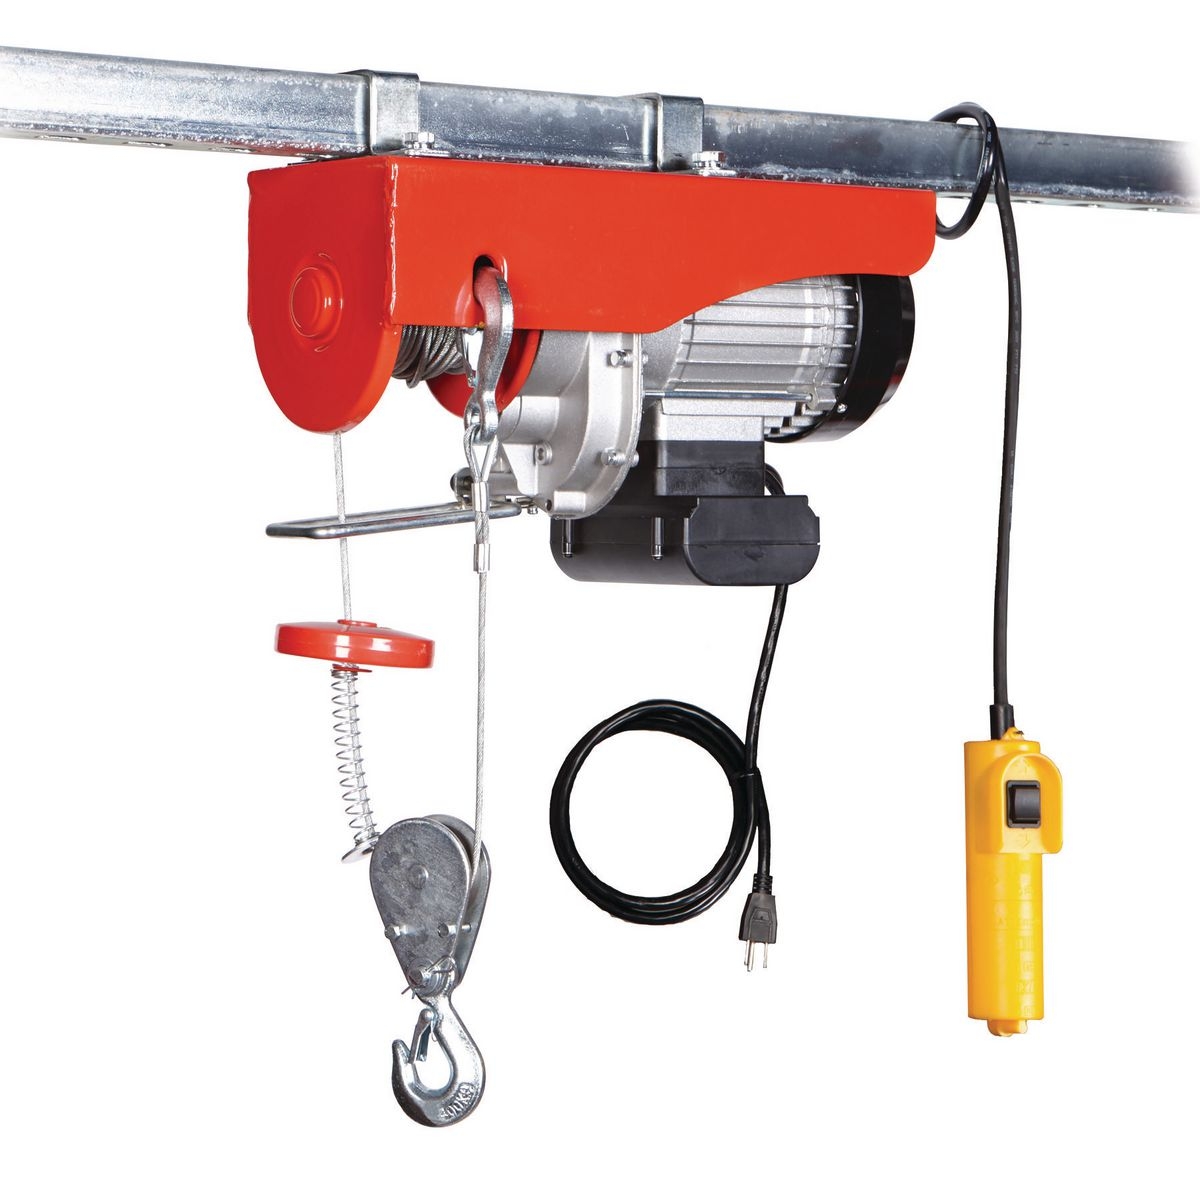 PITTSBURGH AUTOMOTIVE 880 lb. Electric Hoist with Remote Control - Item 62854 / 44006 / 60347 / 60387 / 62768